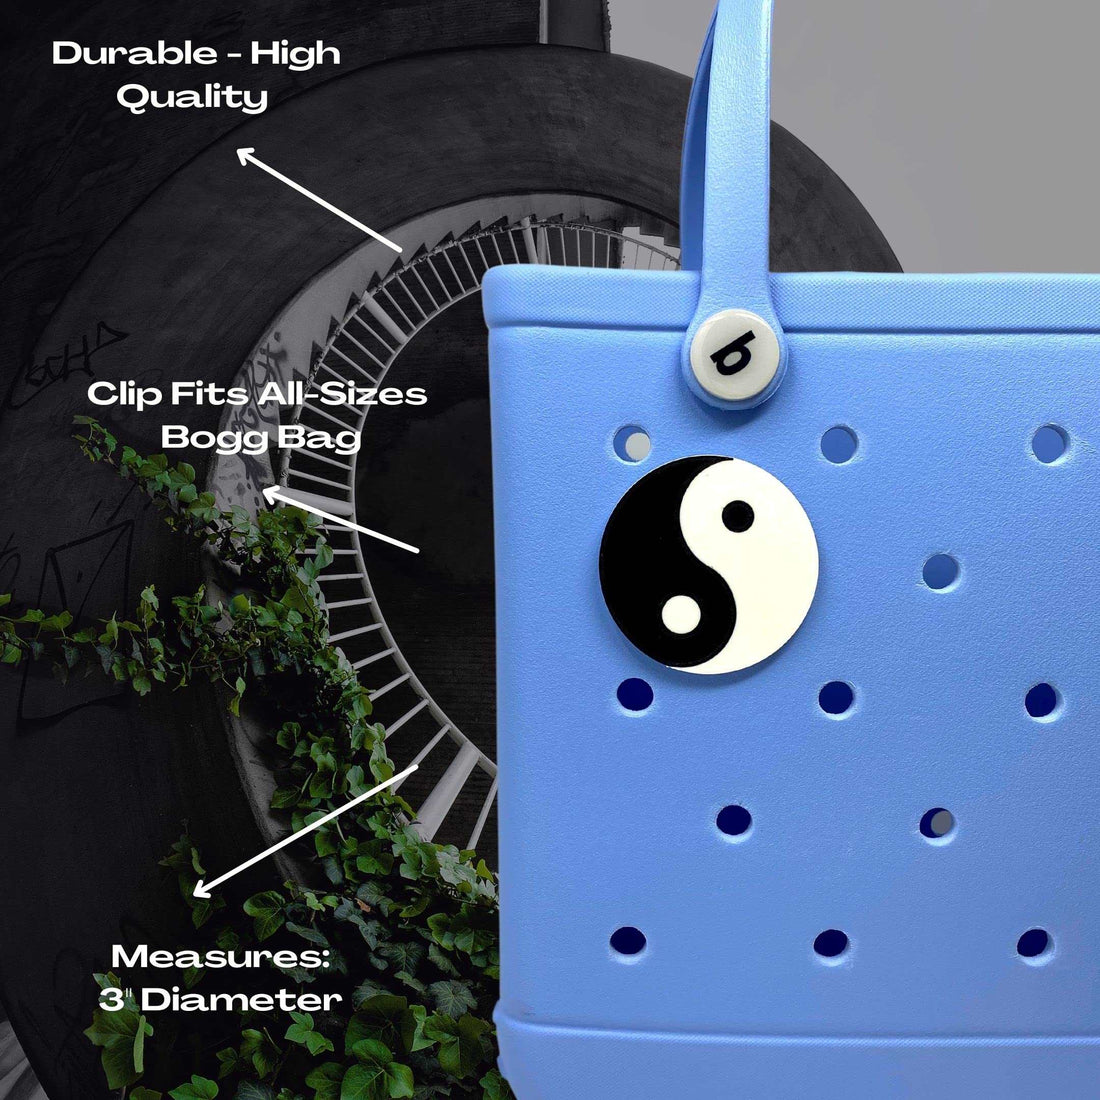 BOGLETS - Yin and Yang Charm Compatible with Bogg Bags, Simply Southern and Other Similar Tote Bags.